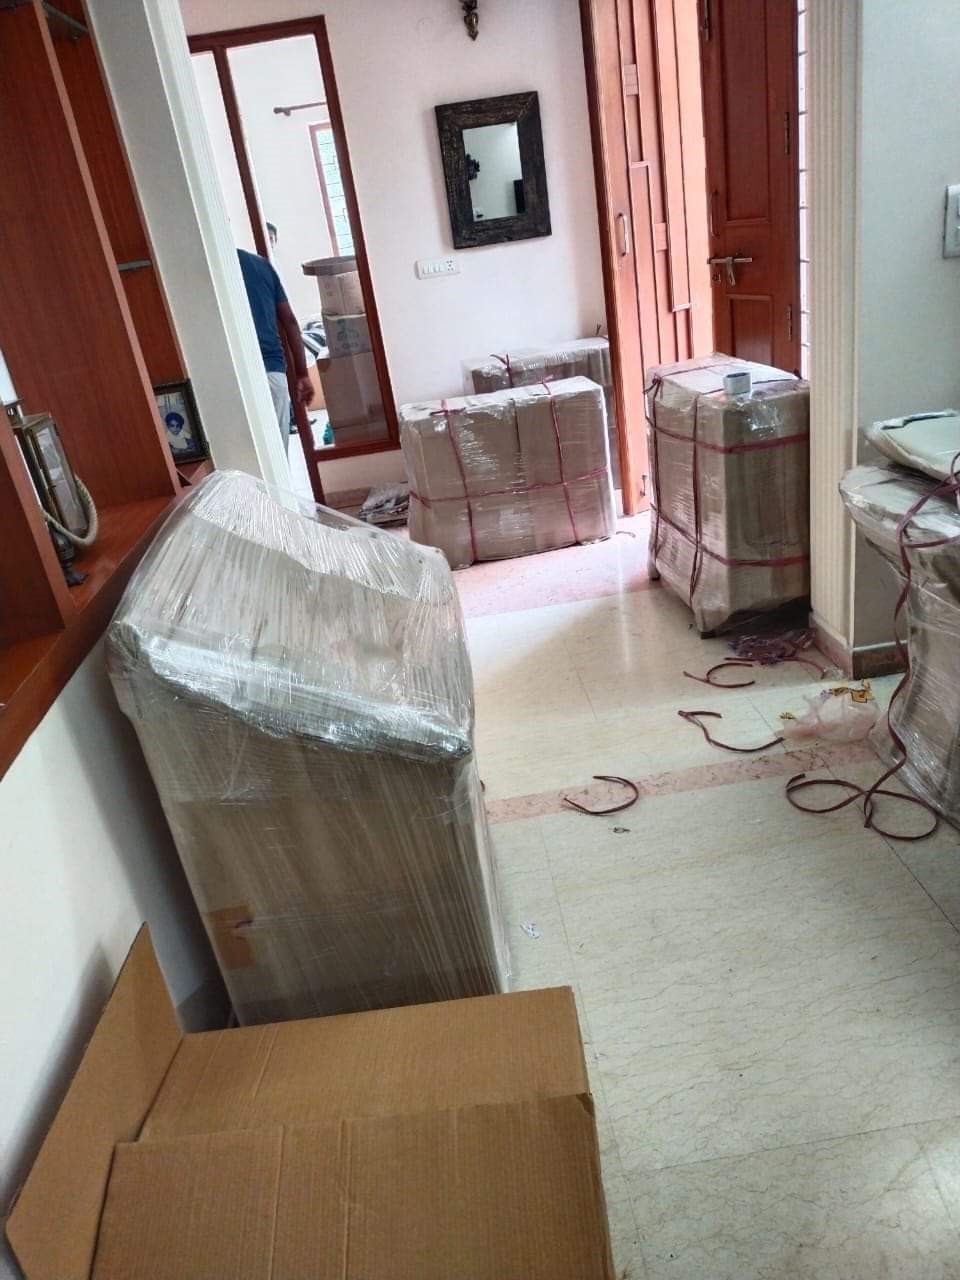 Rehousing packers and movers from Delhi transportation services image in Hyderabad office